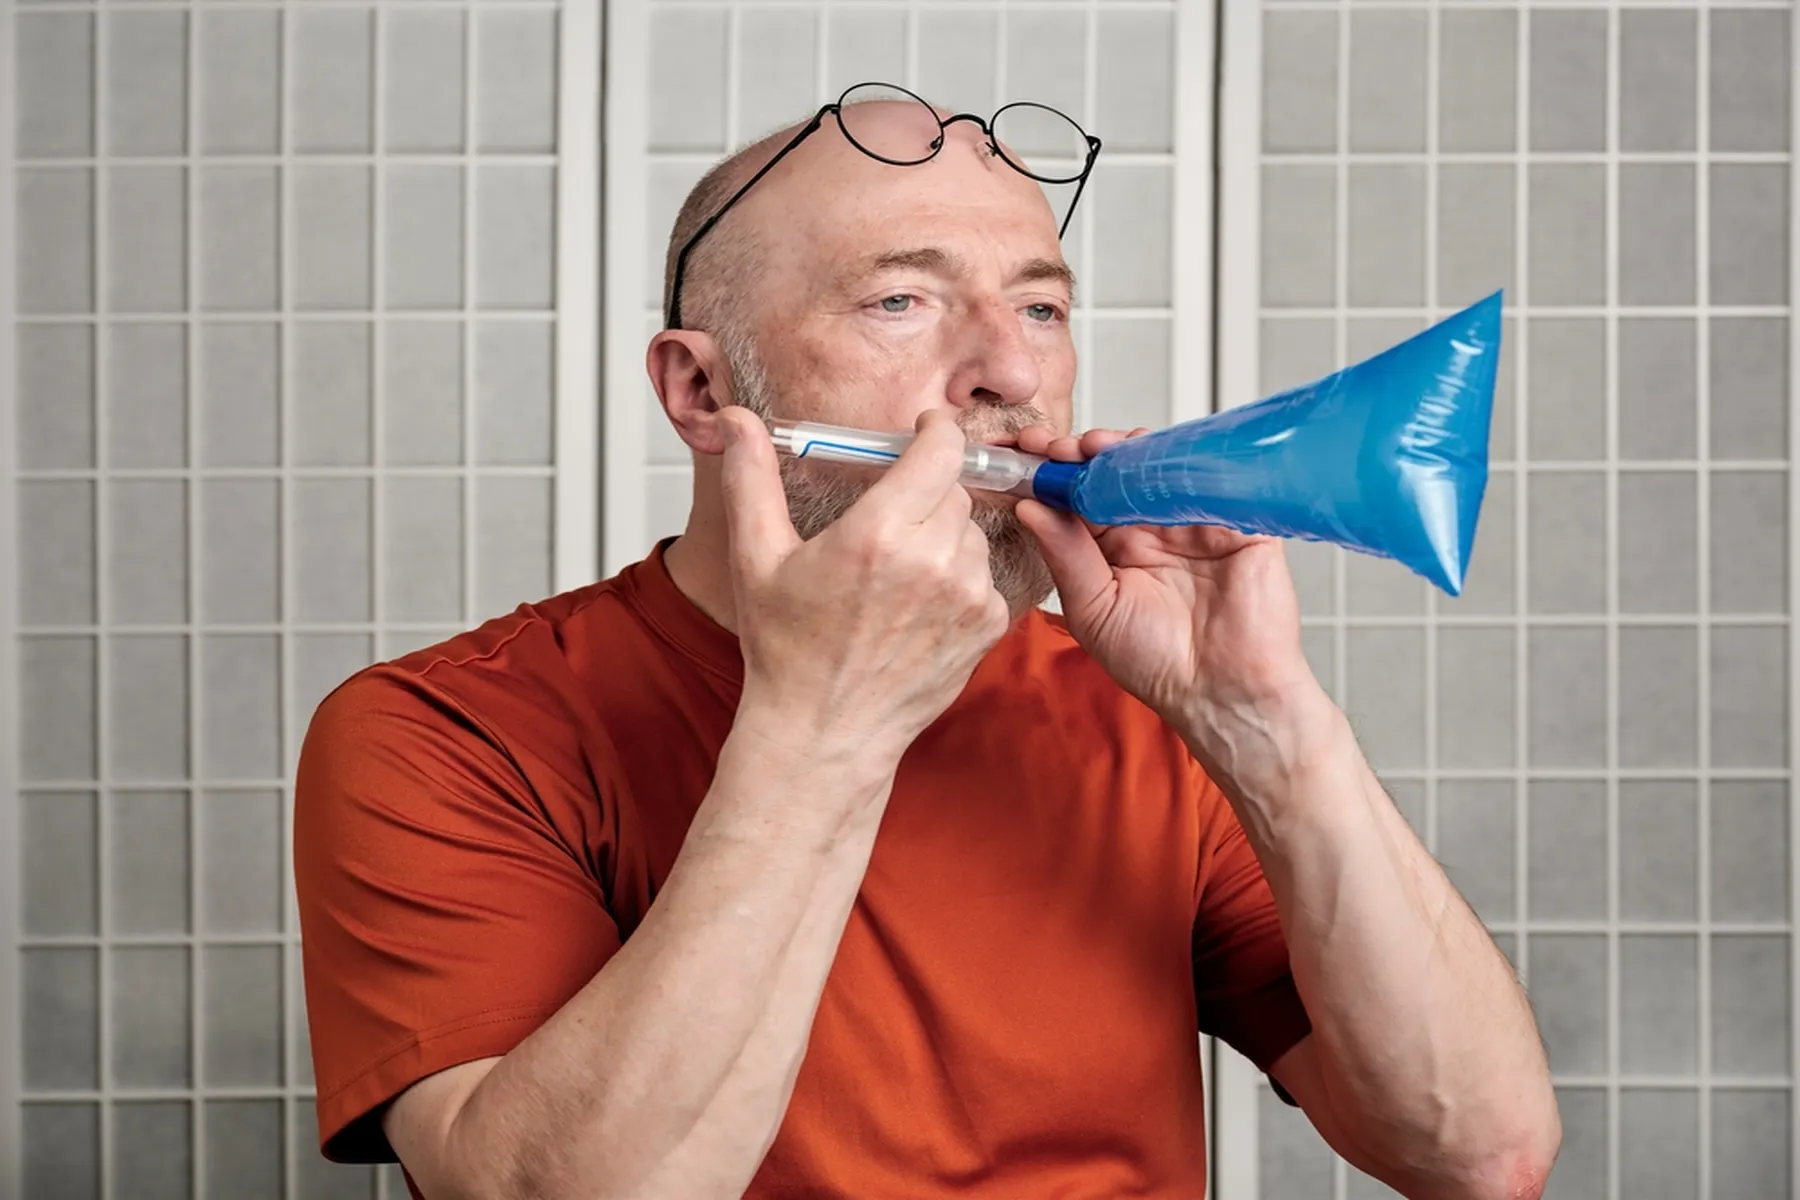 A man self-performs a hydrogen breath test to test for lactose intolerance.